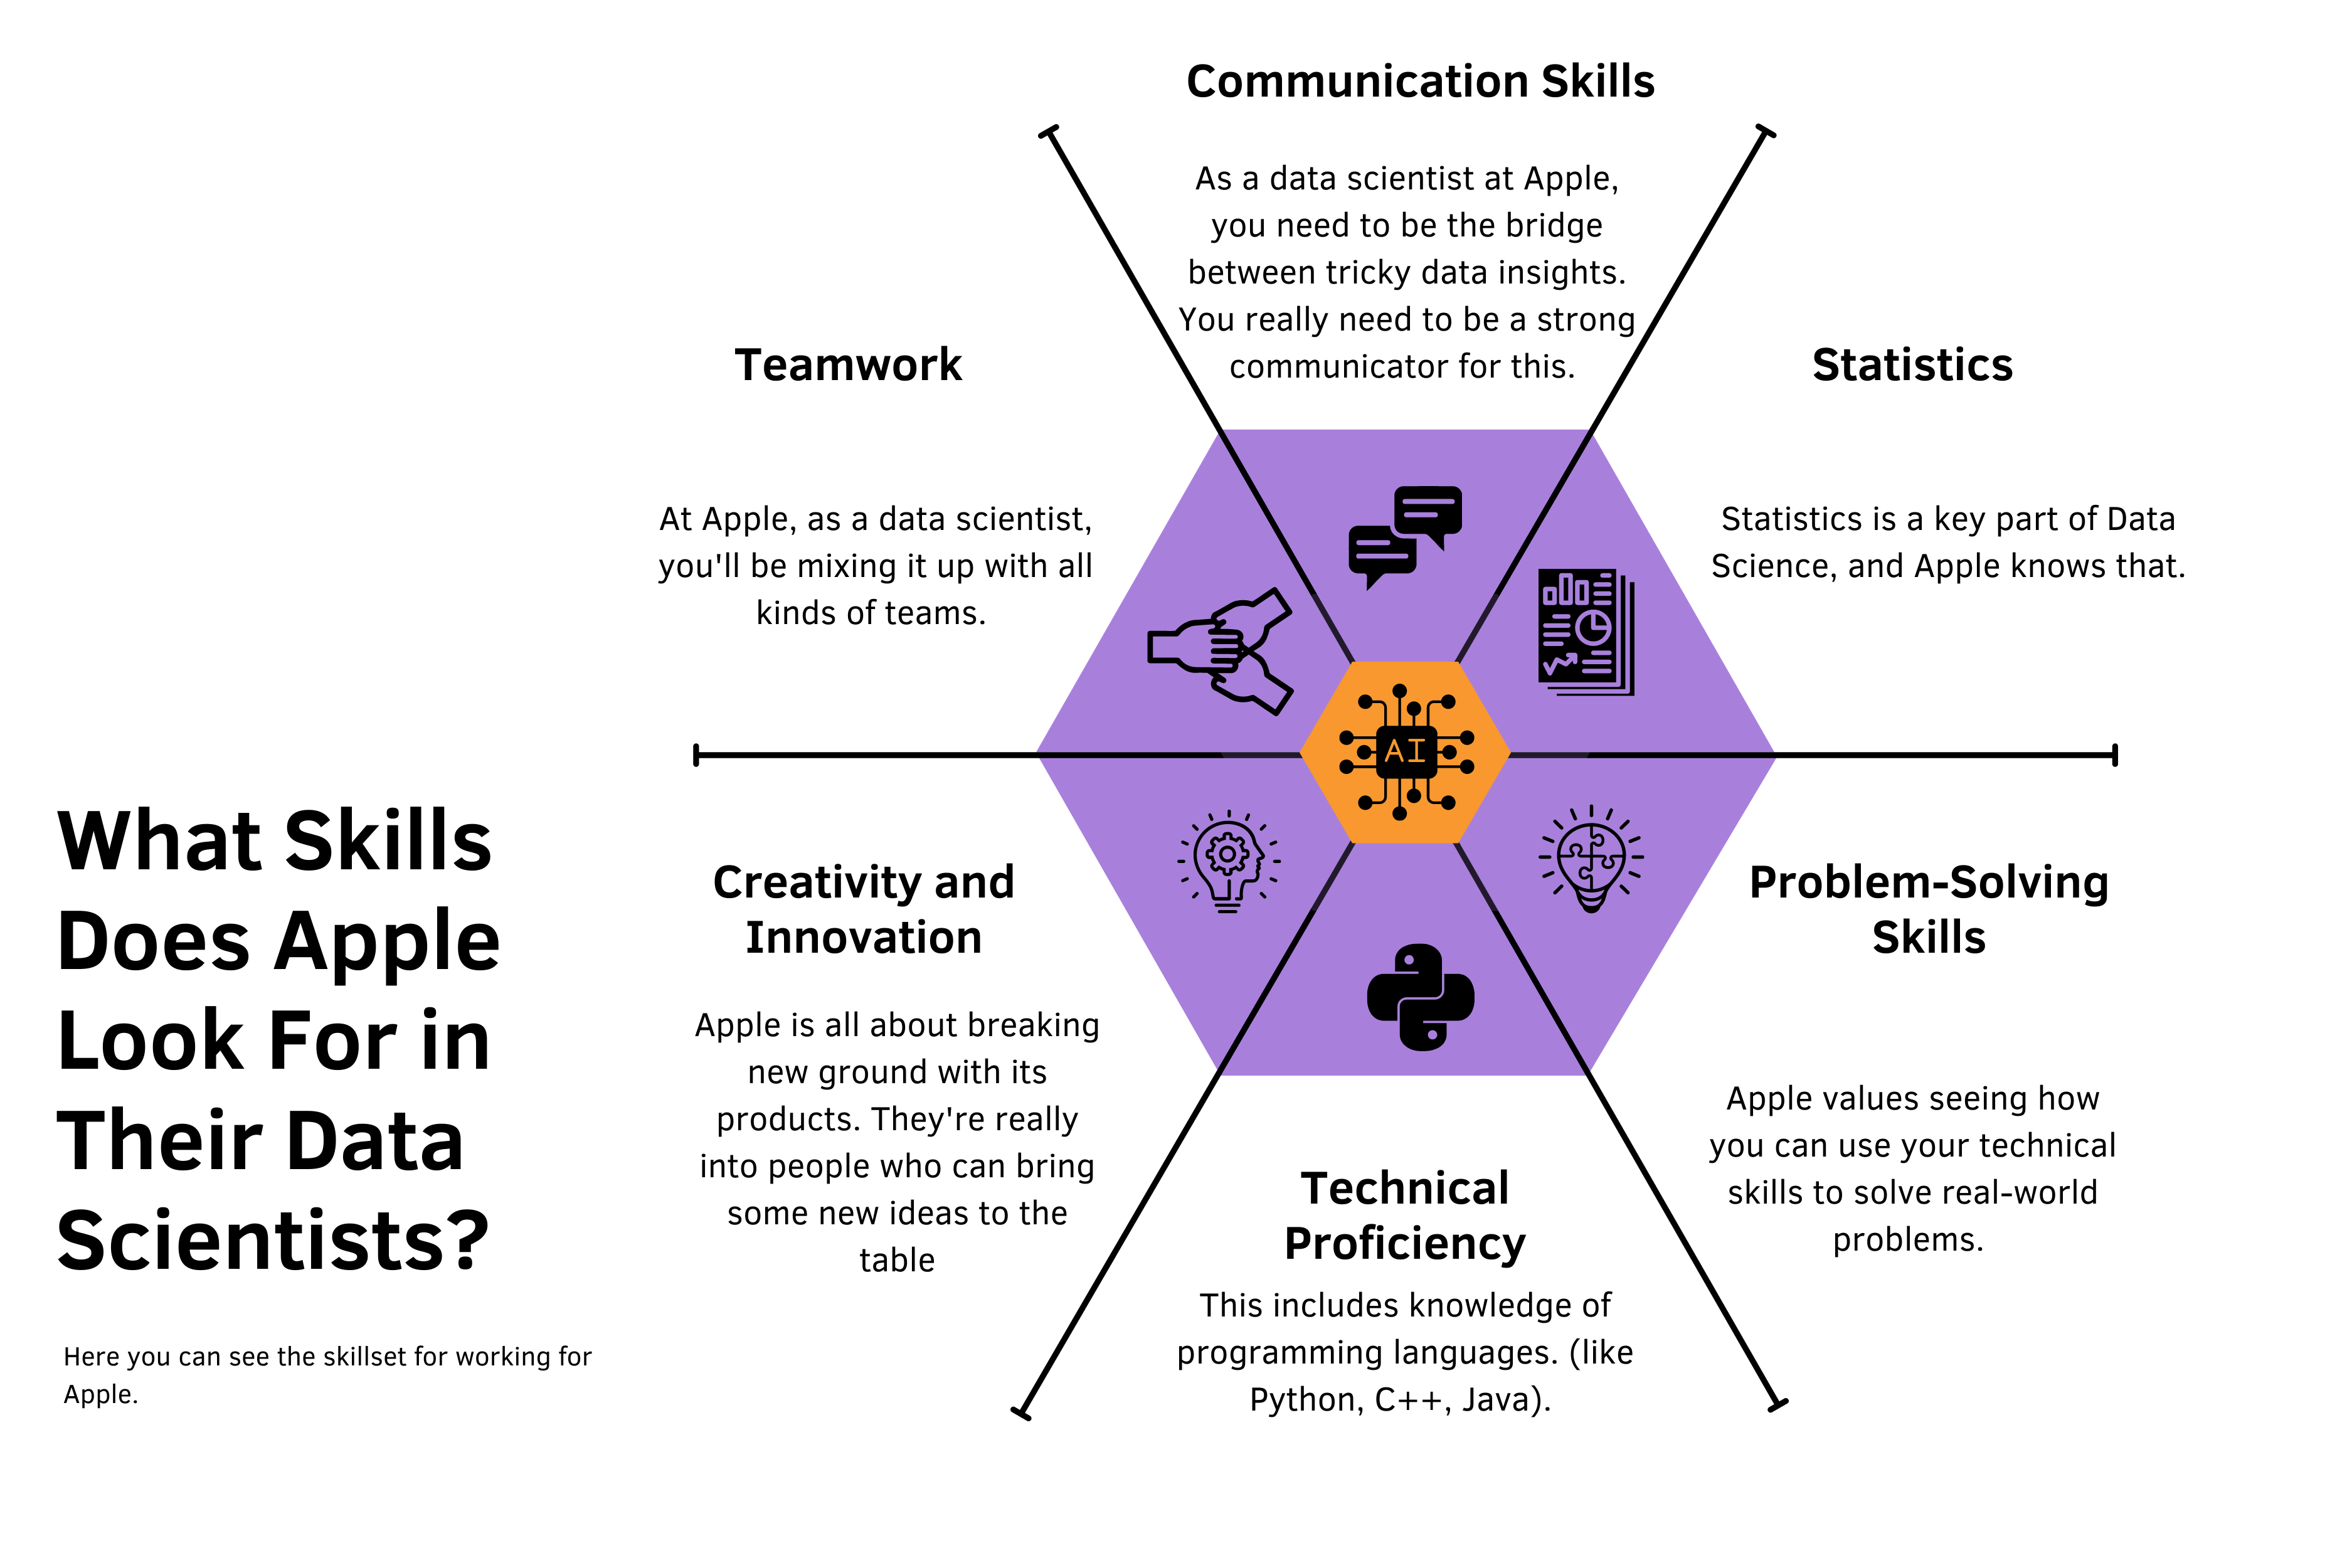 What Skills Does Apple Look For in Their Data Scientists